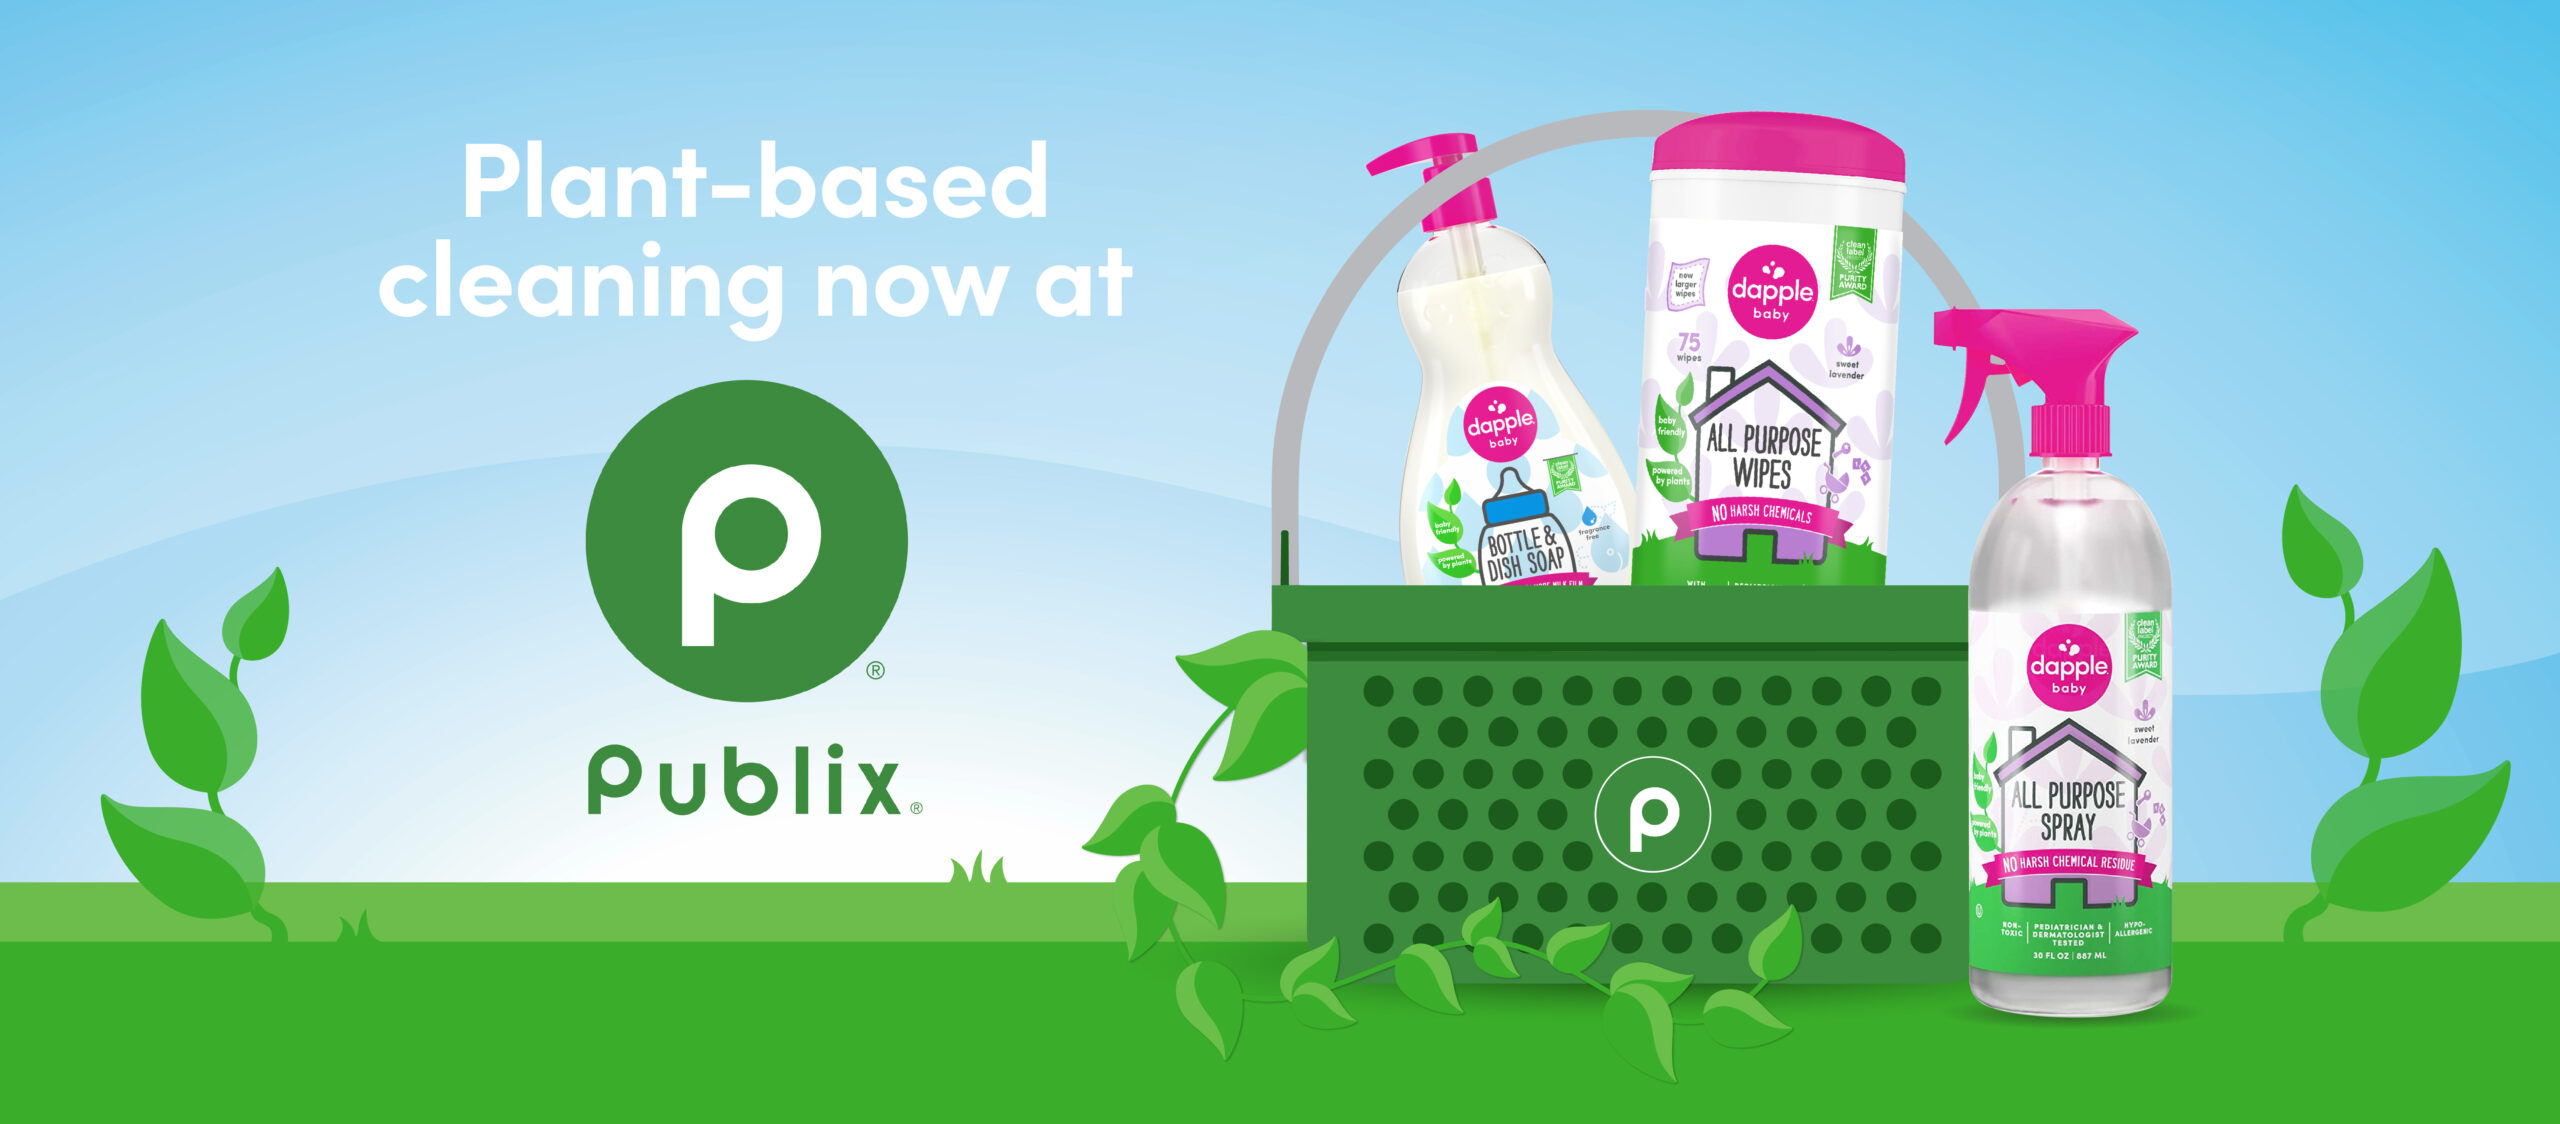 Plant based cleaning! Now at Publix.